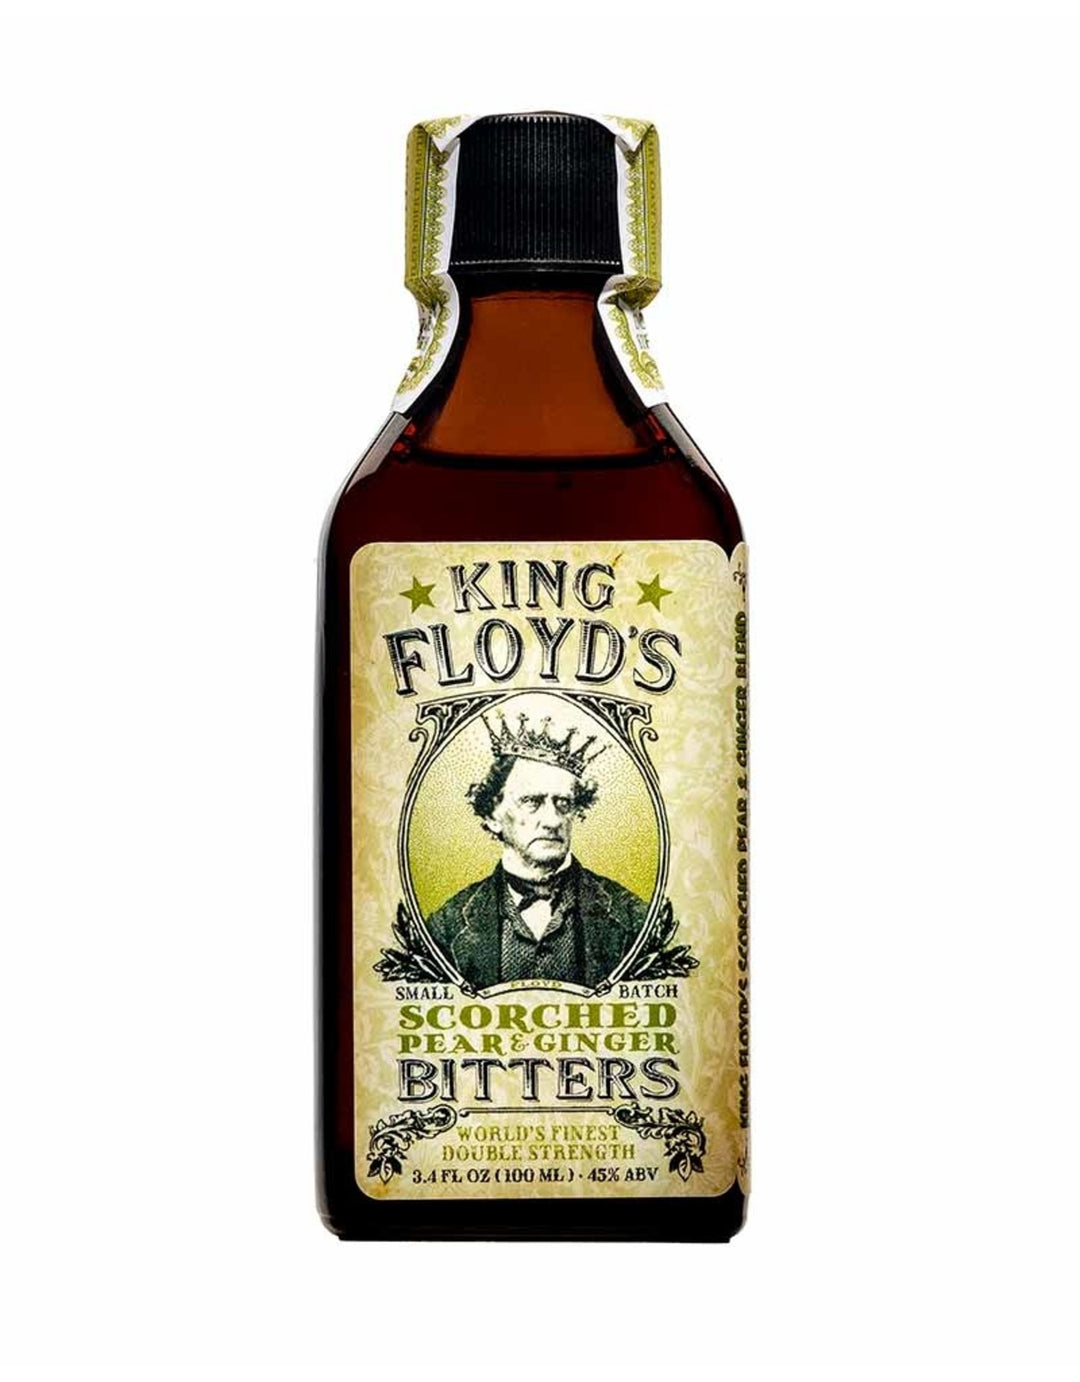 King Floyd's Scorched Pear Bitters